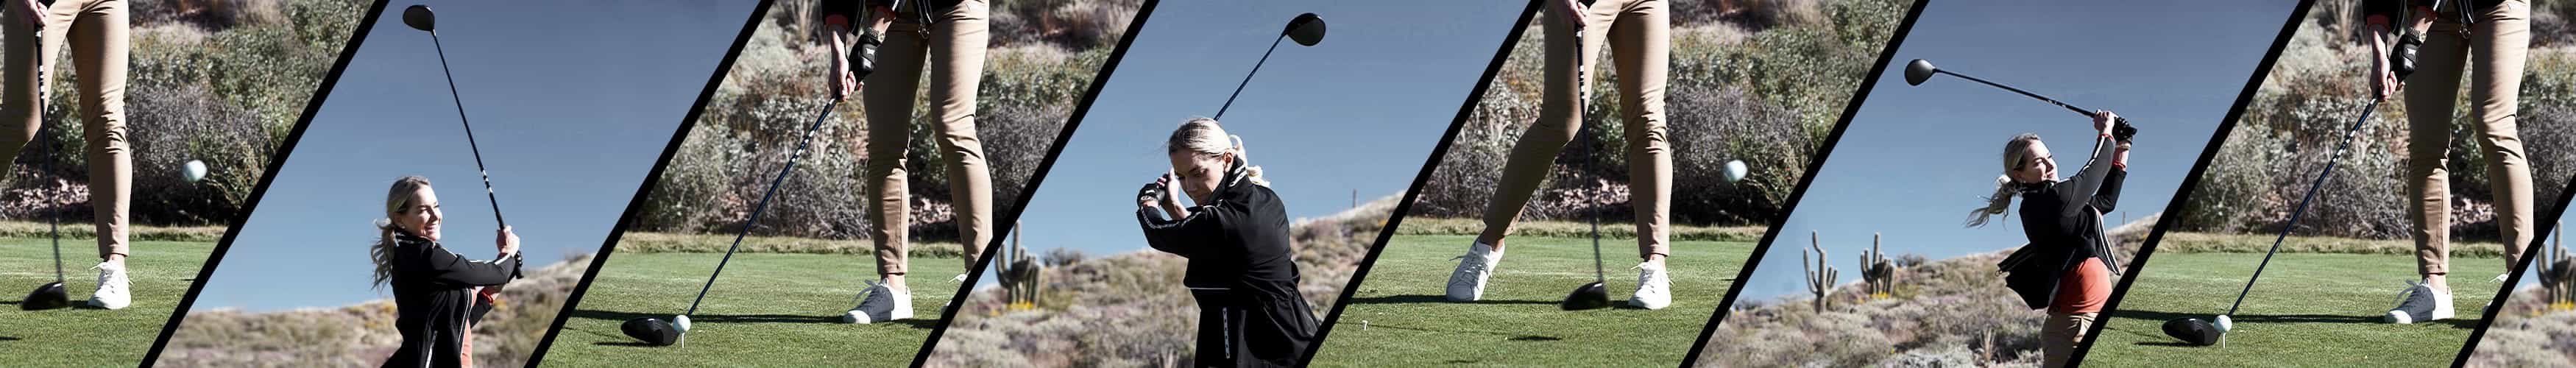 Various poses of woman playing golf